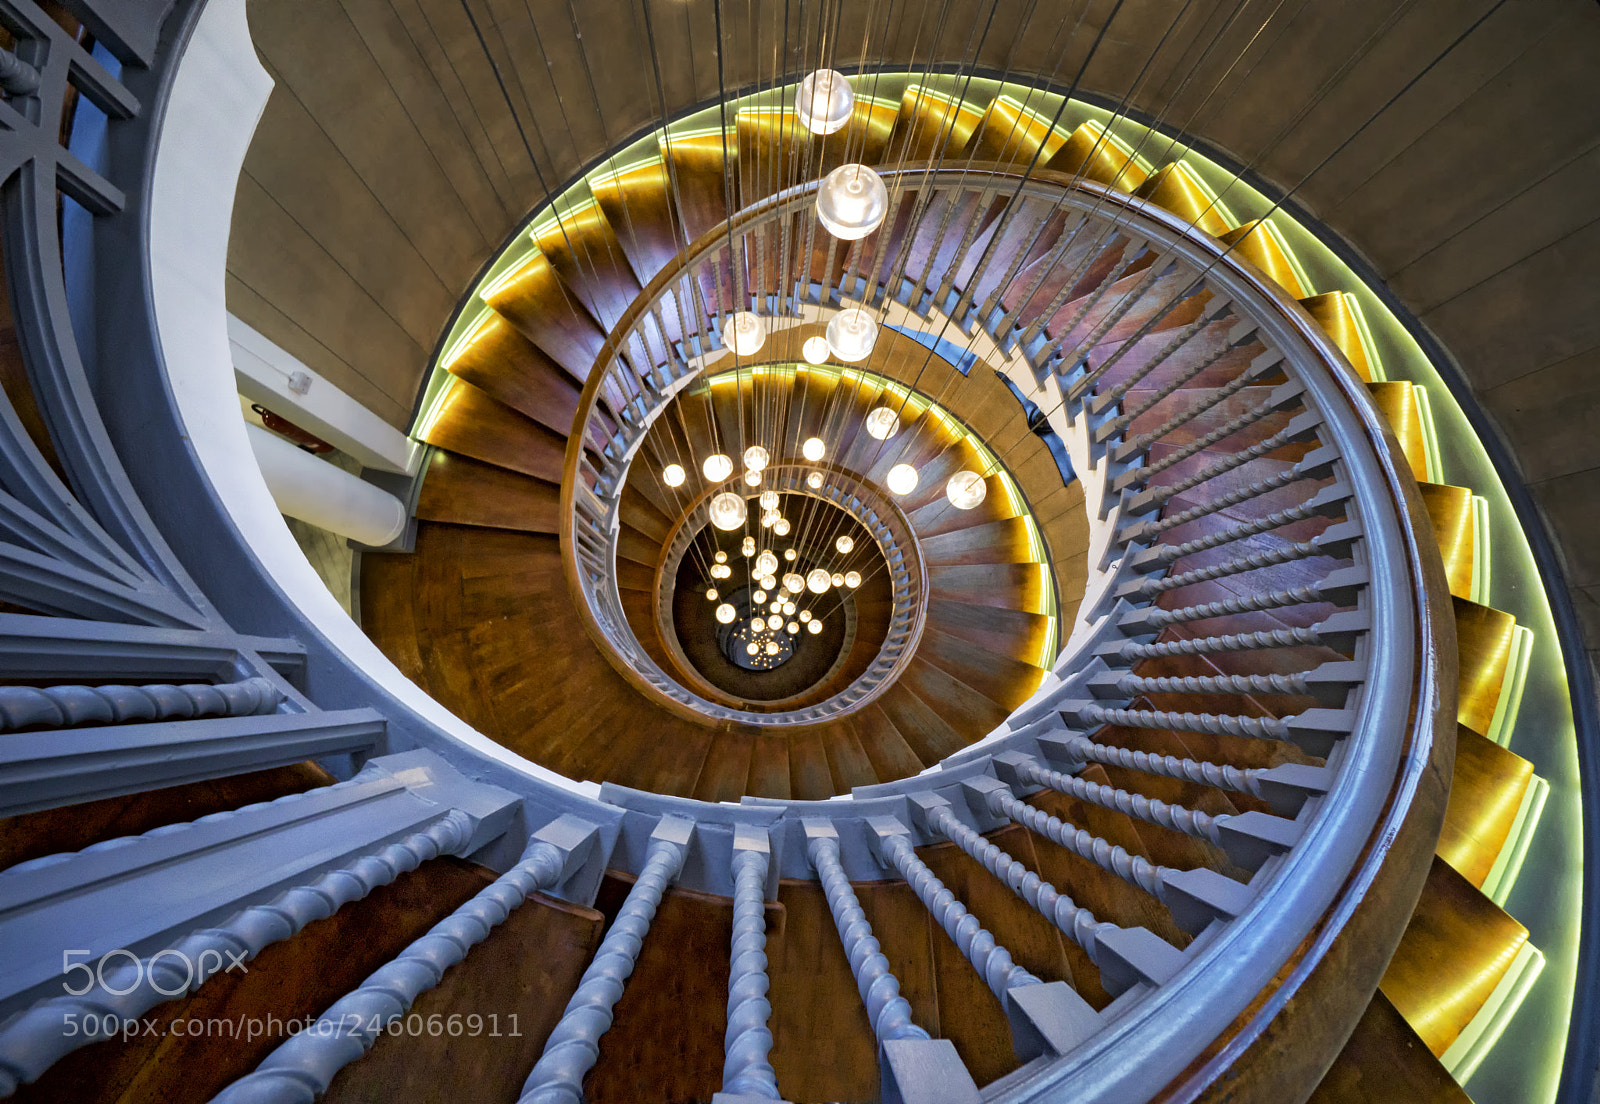 Sony a6000 sample photo. Heal's spiral staircase photography